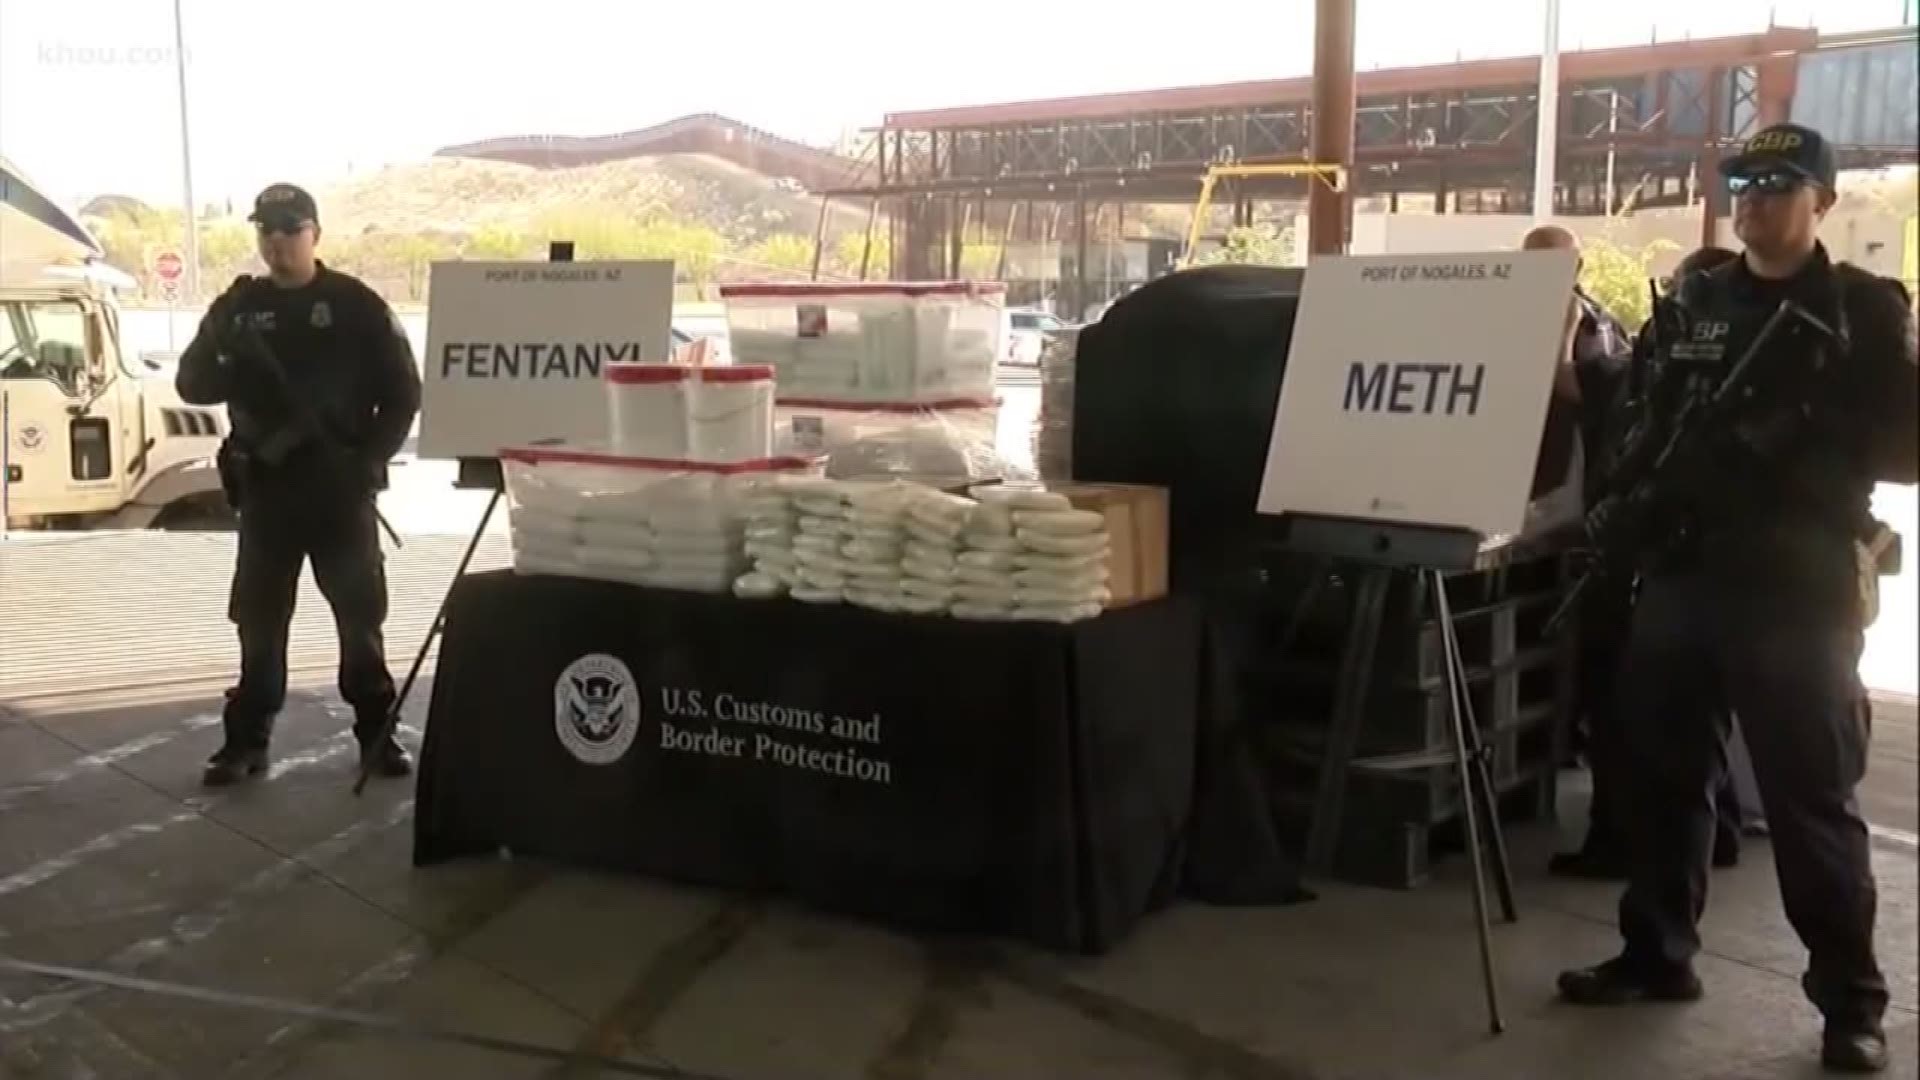 The border patrol agents said the drugs were found at the Arizona border in a trailer carrying produce from Mexico.